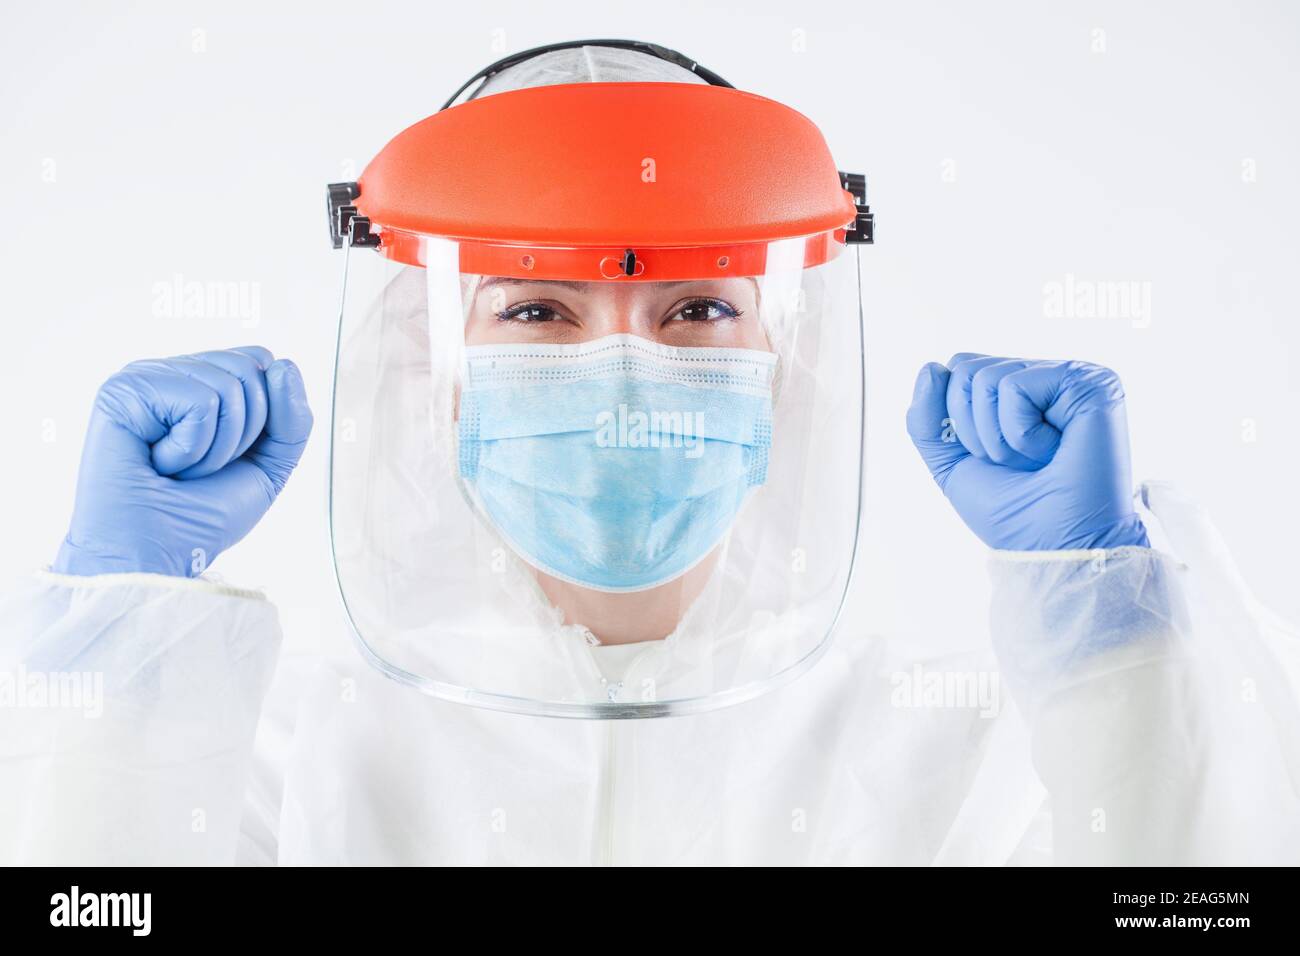 Healthcare professional in personal protective equipment, wearing surgical gloves, face shield, white protective hazmat biohazard suit, clenched fists Stock Photo